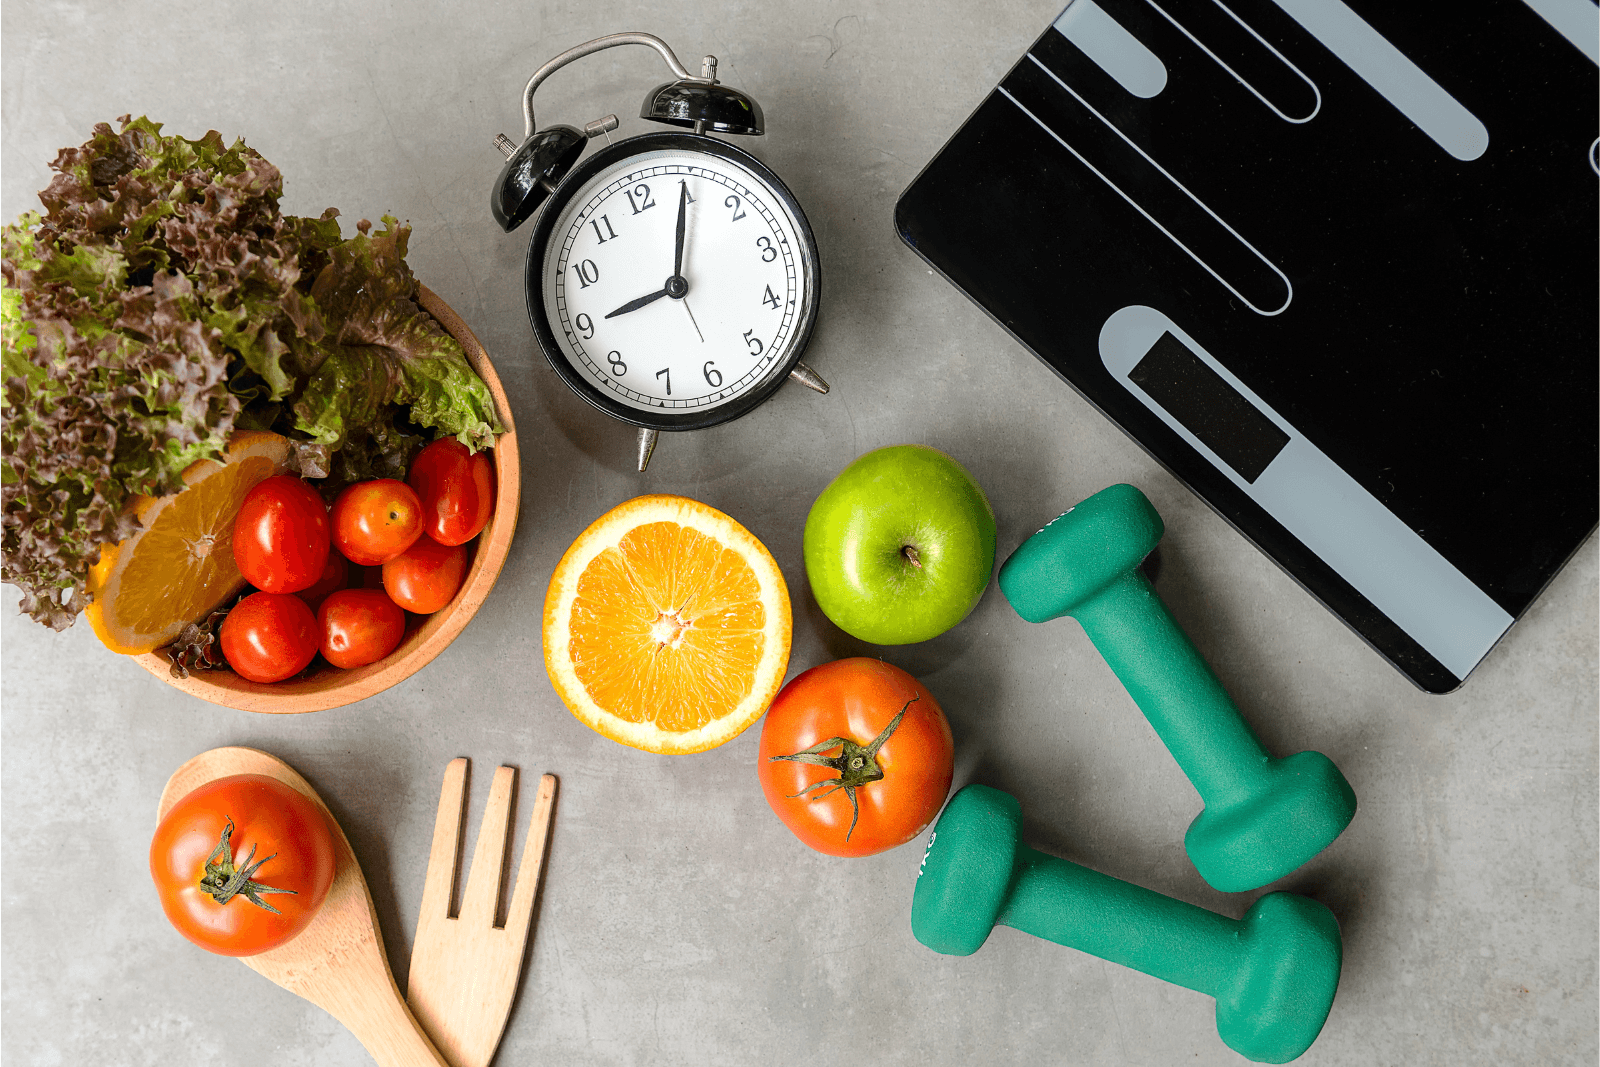 Bariatric Surgery Nutrition and Wellness Tips — My Bariatric Dietitian